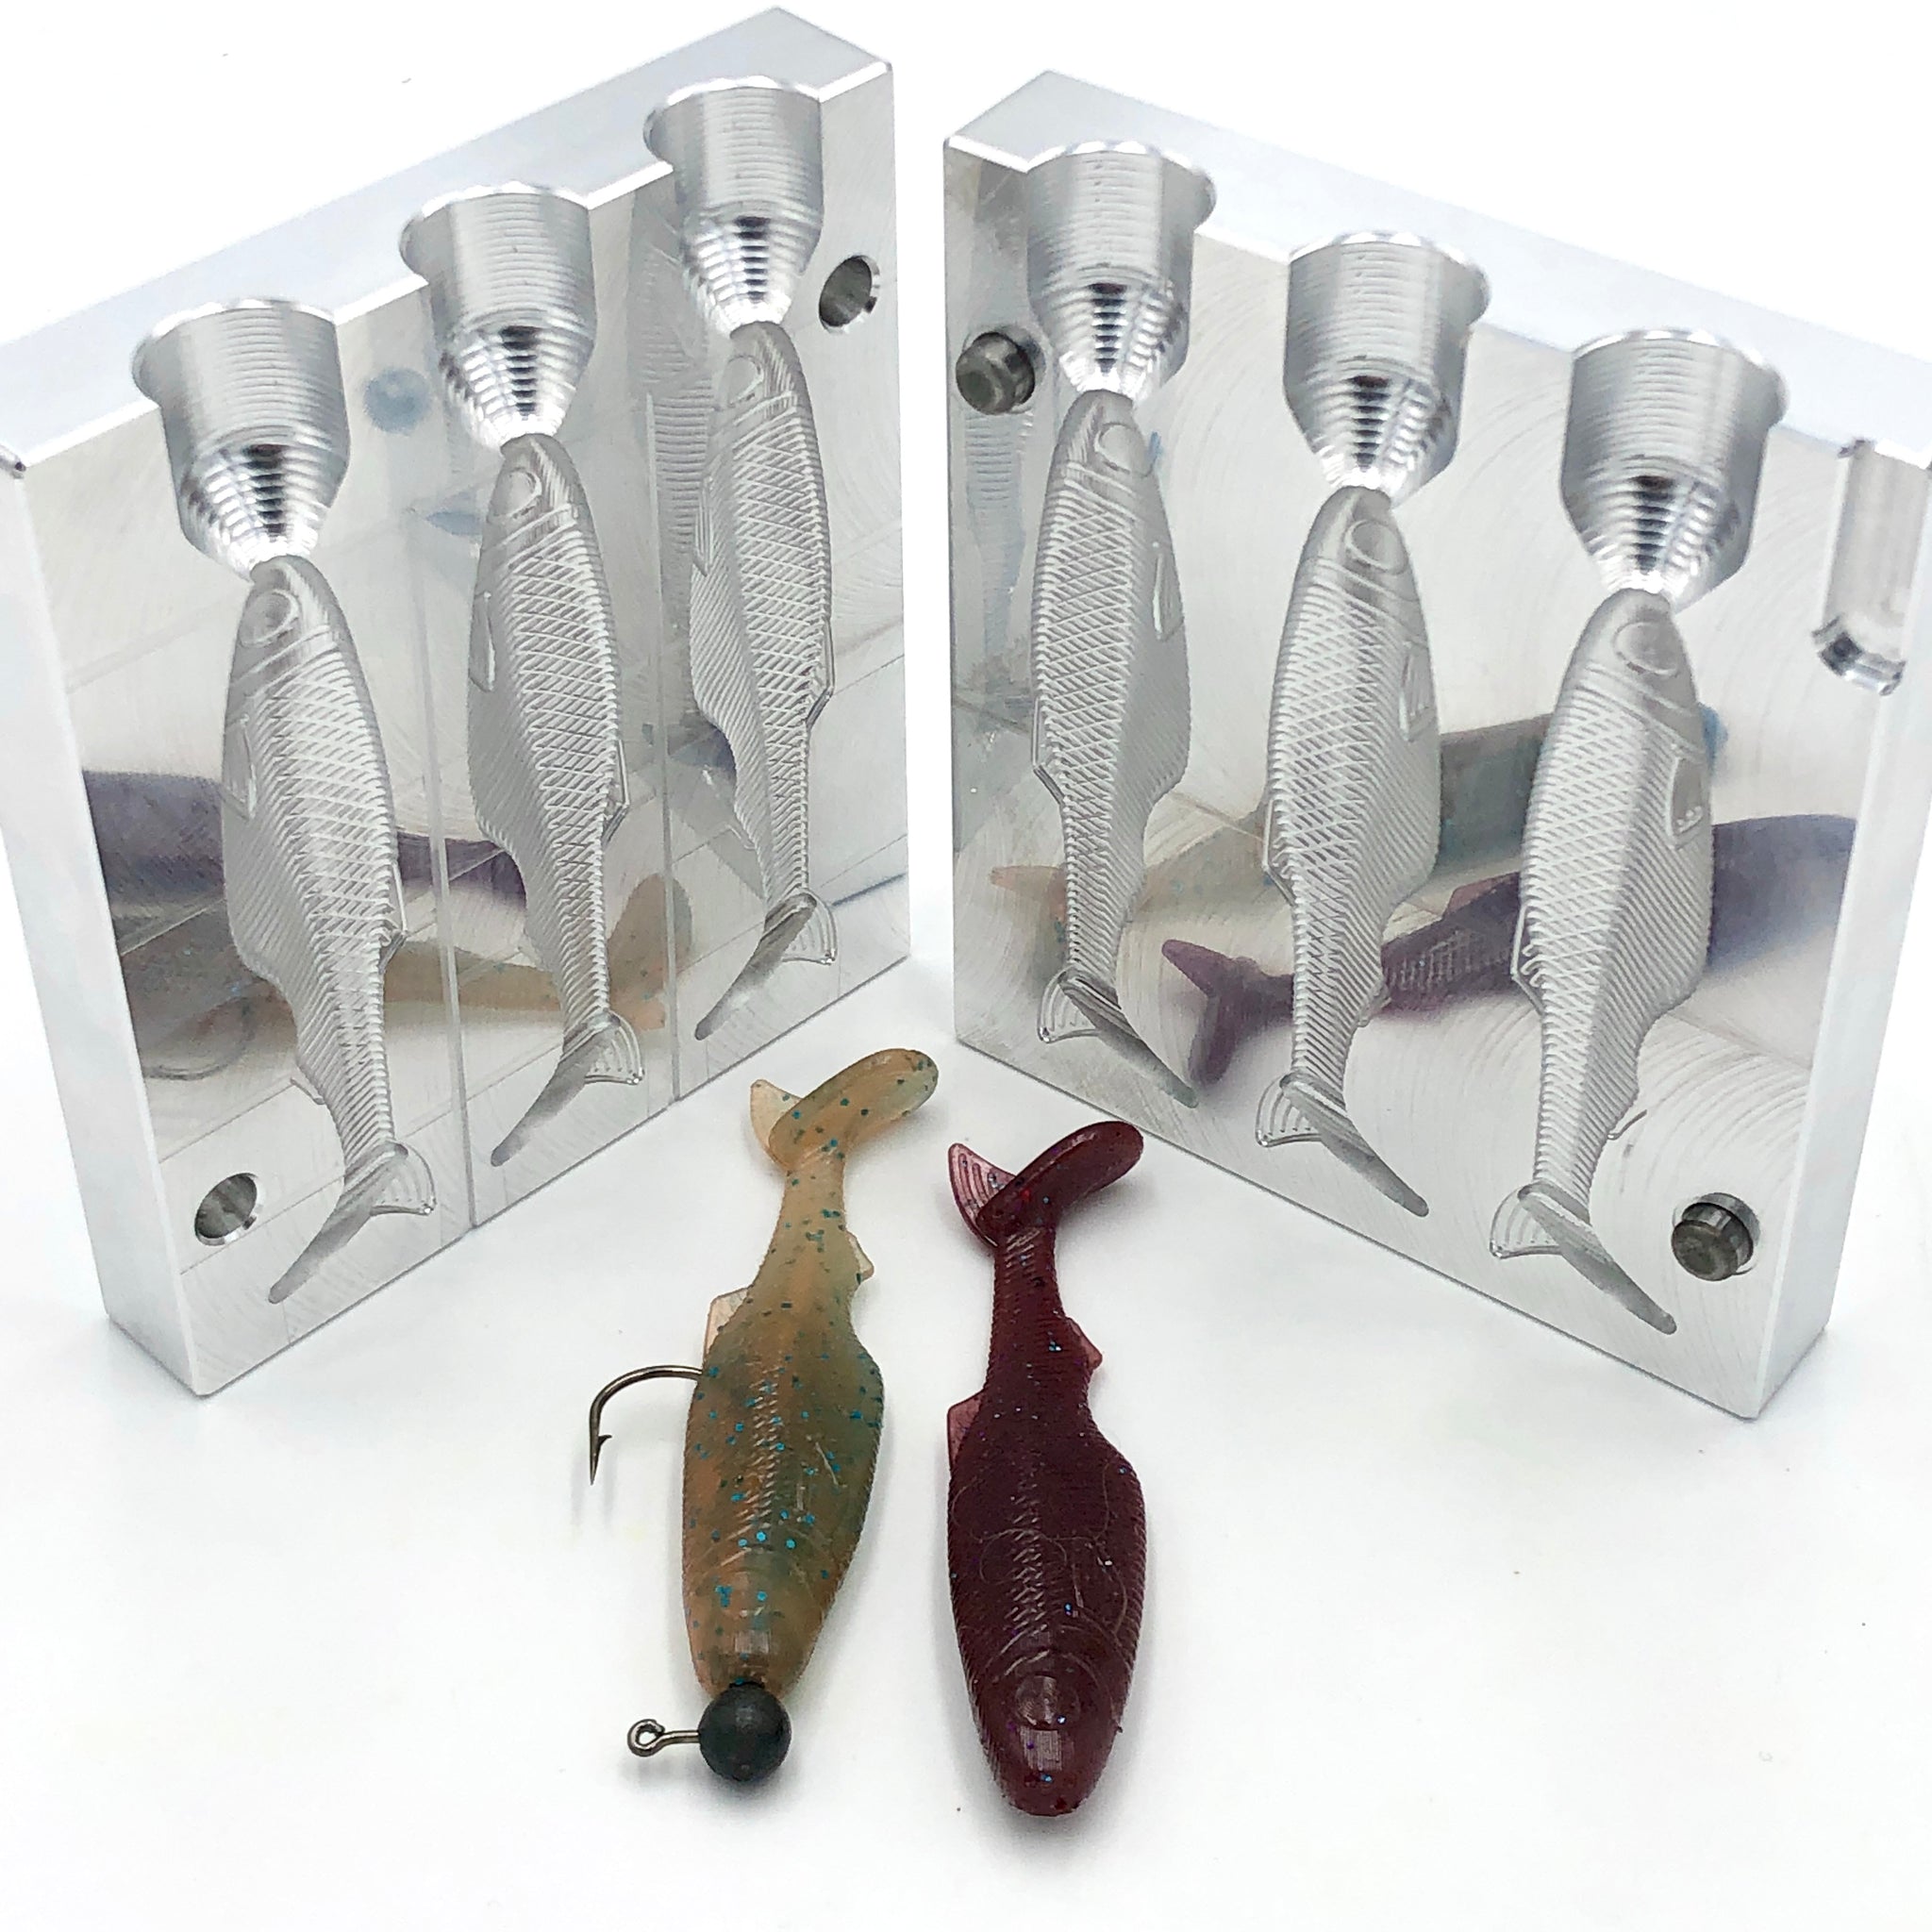 3 Inch Epic PreyBait Hand Injection Mold – Epic Bait Molds